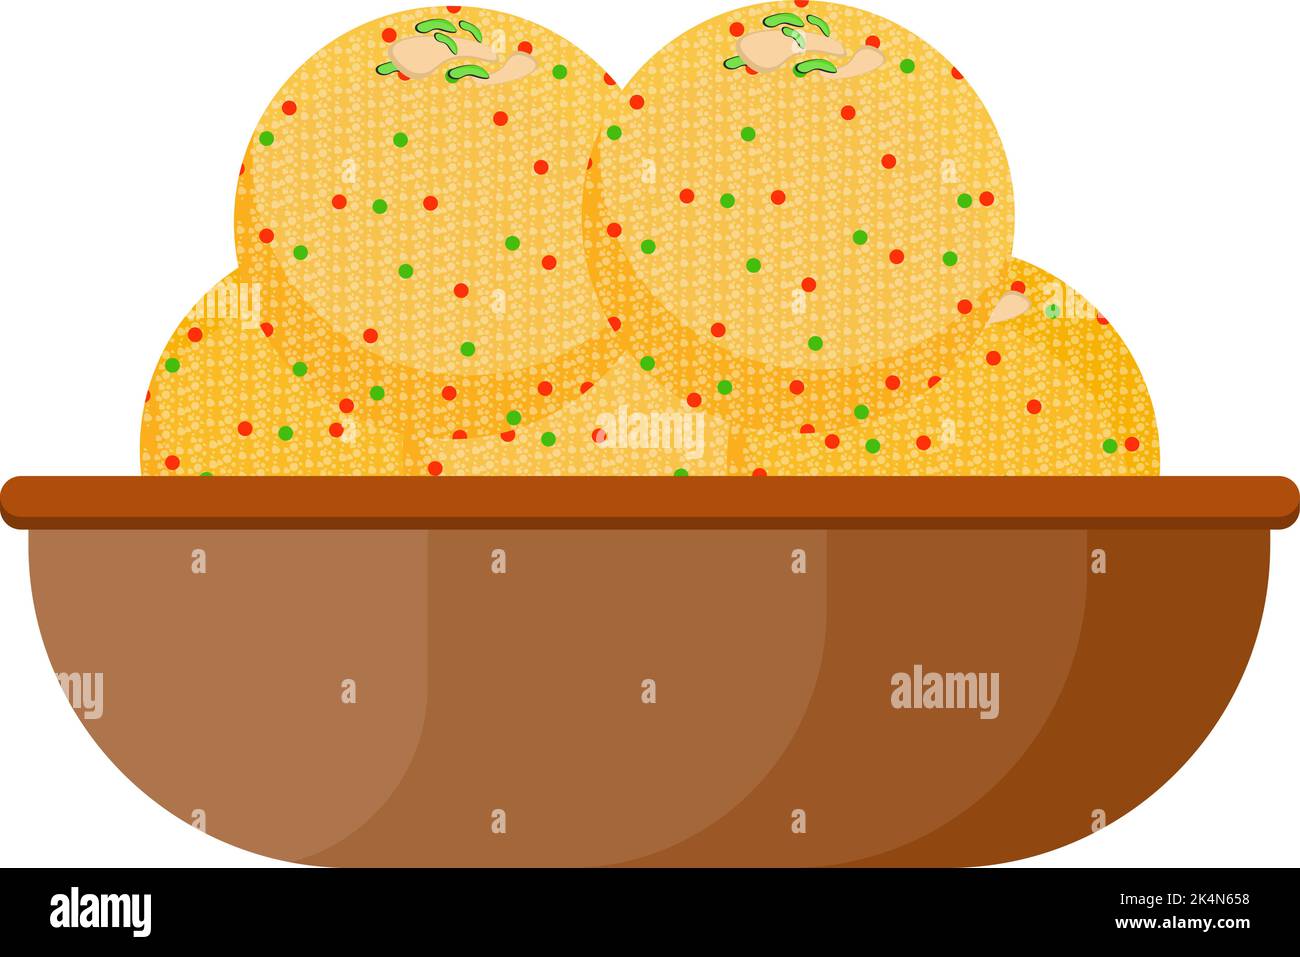 Delicious lado, illustration, vector on a white background. Stock Vector